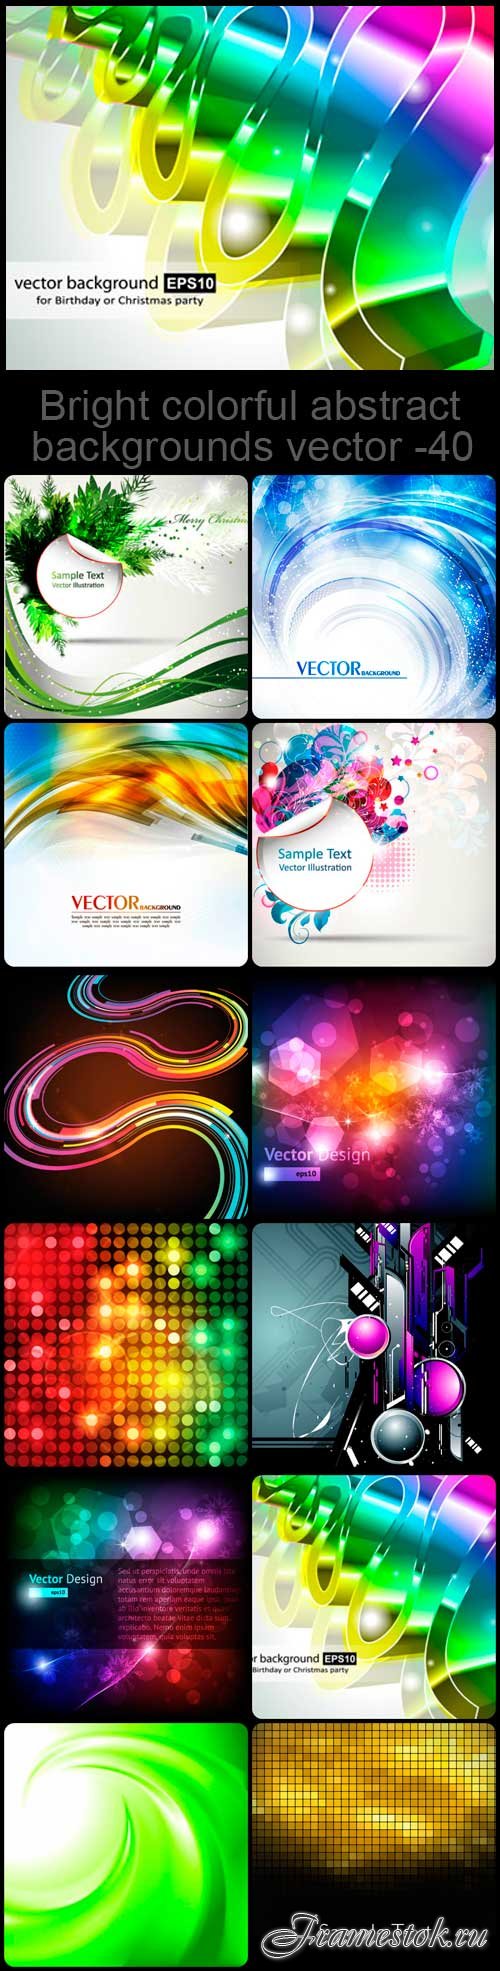 Bright colorful abstract backgrounds vector -40